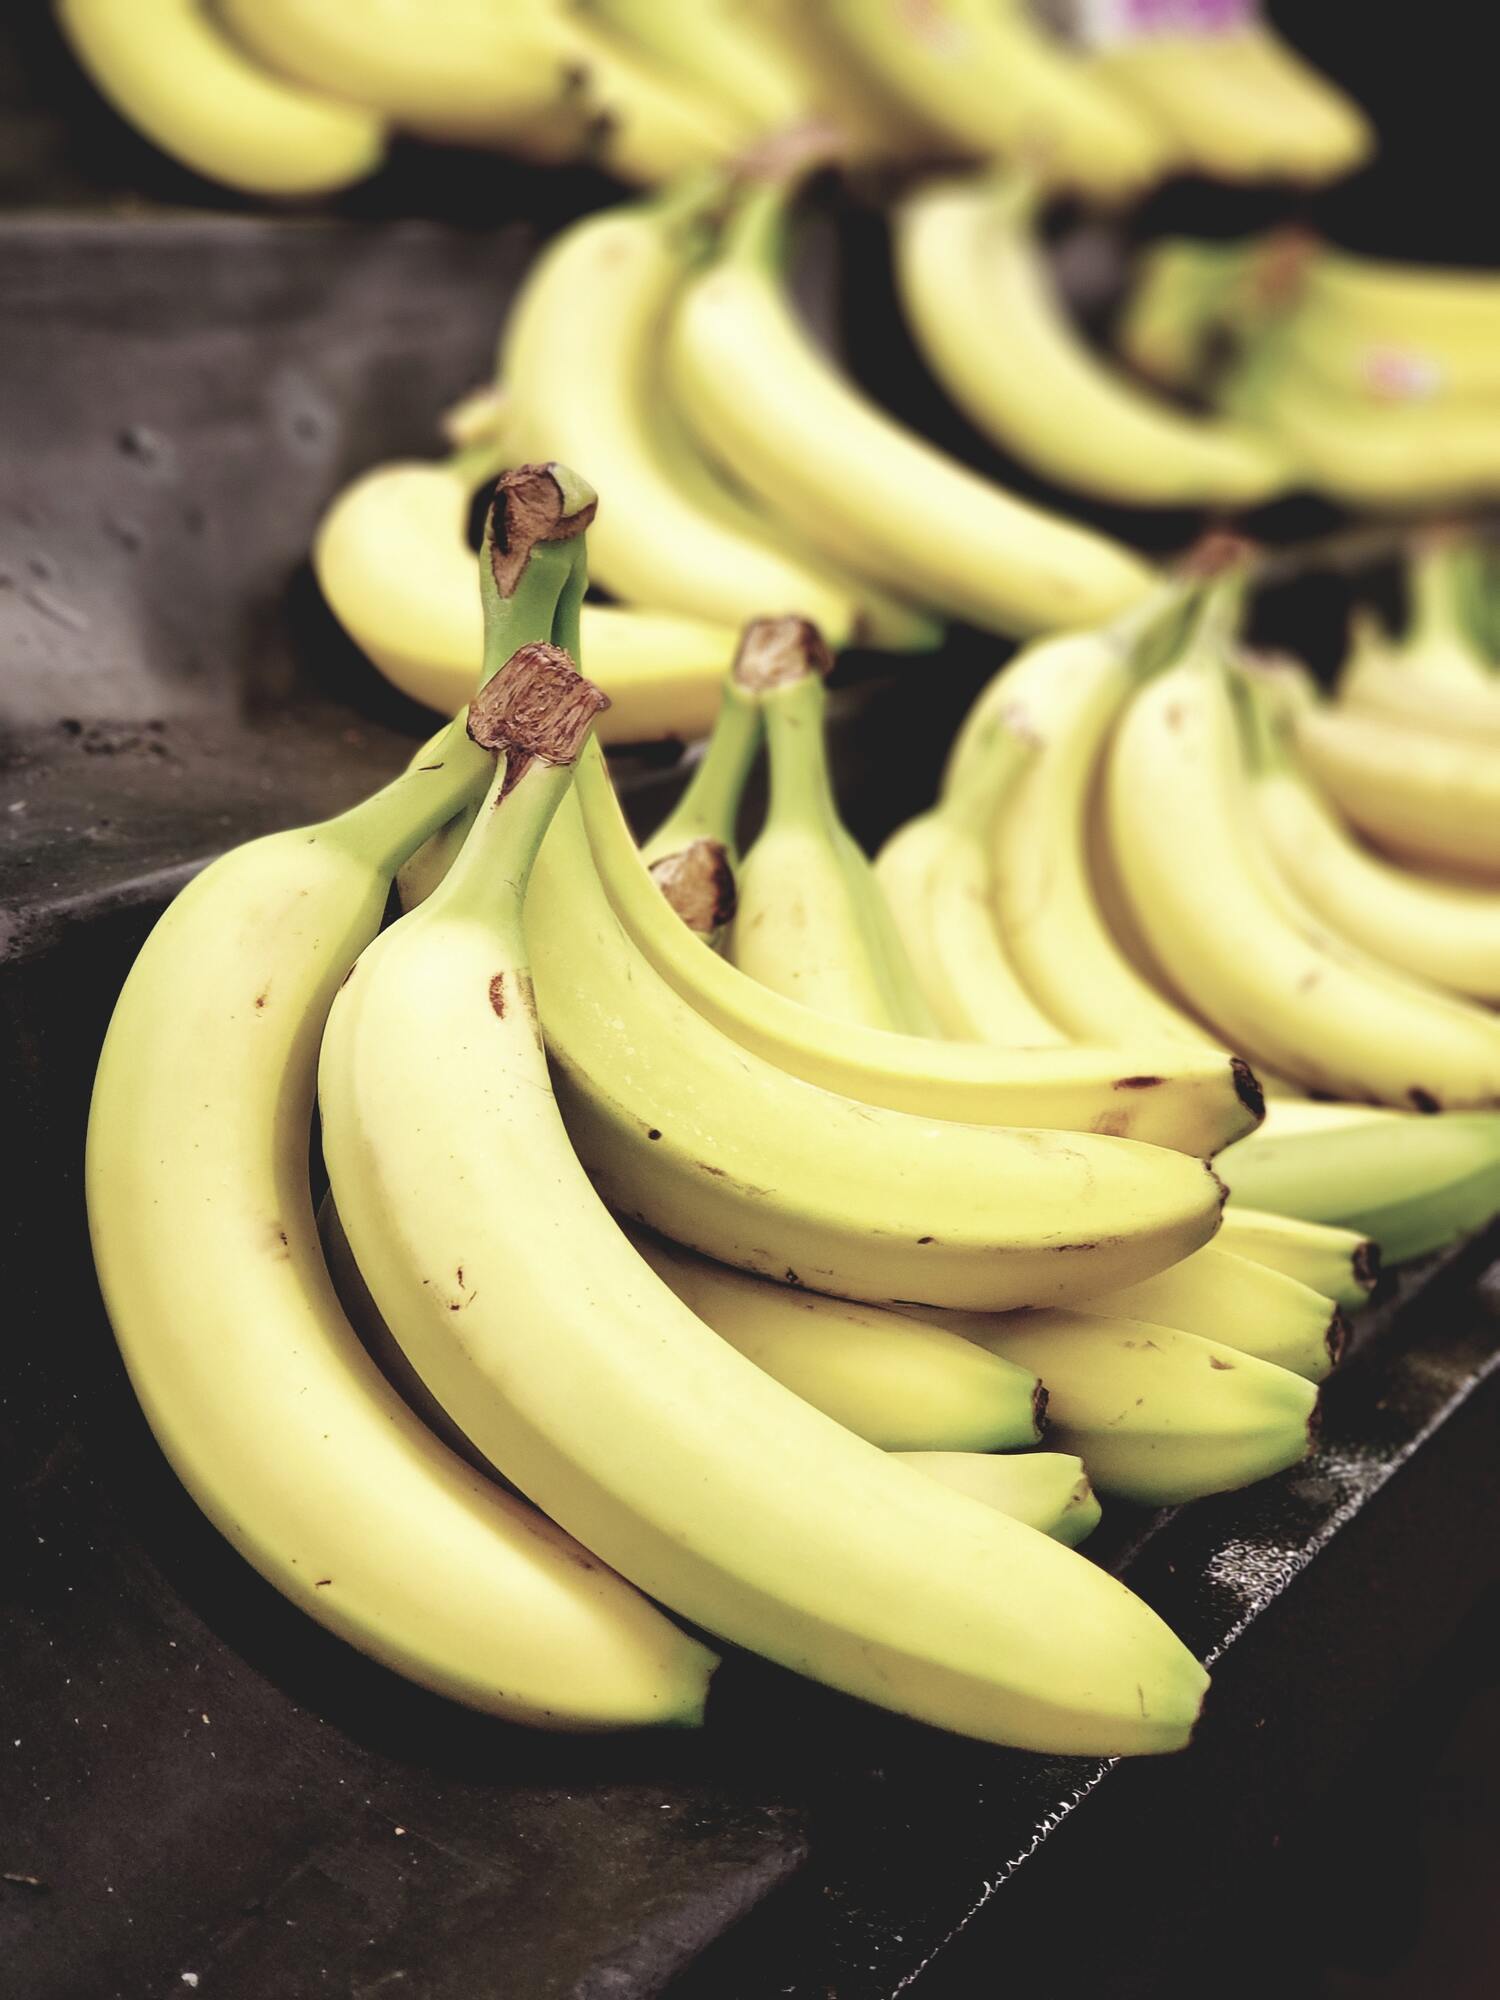 How to store bananas properly